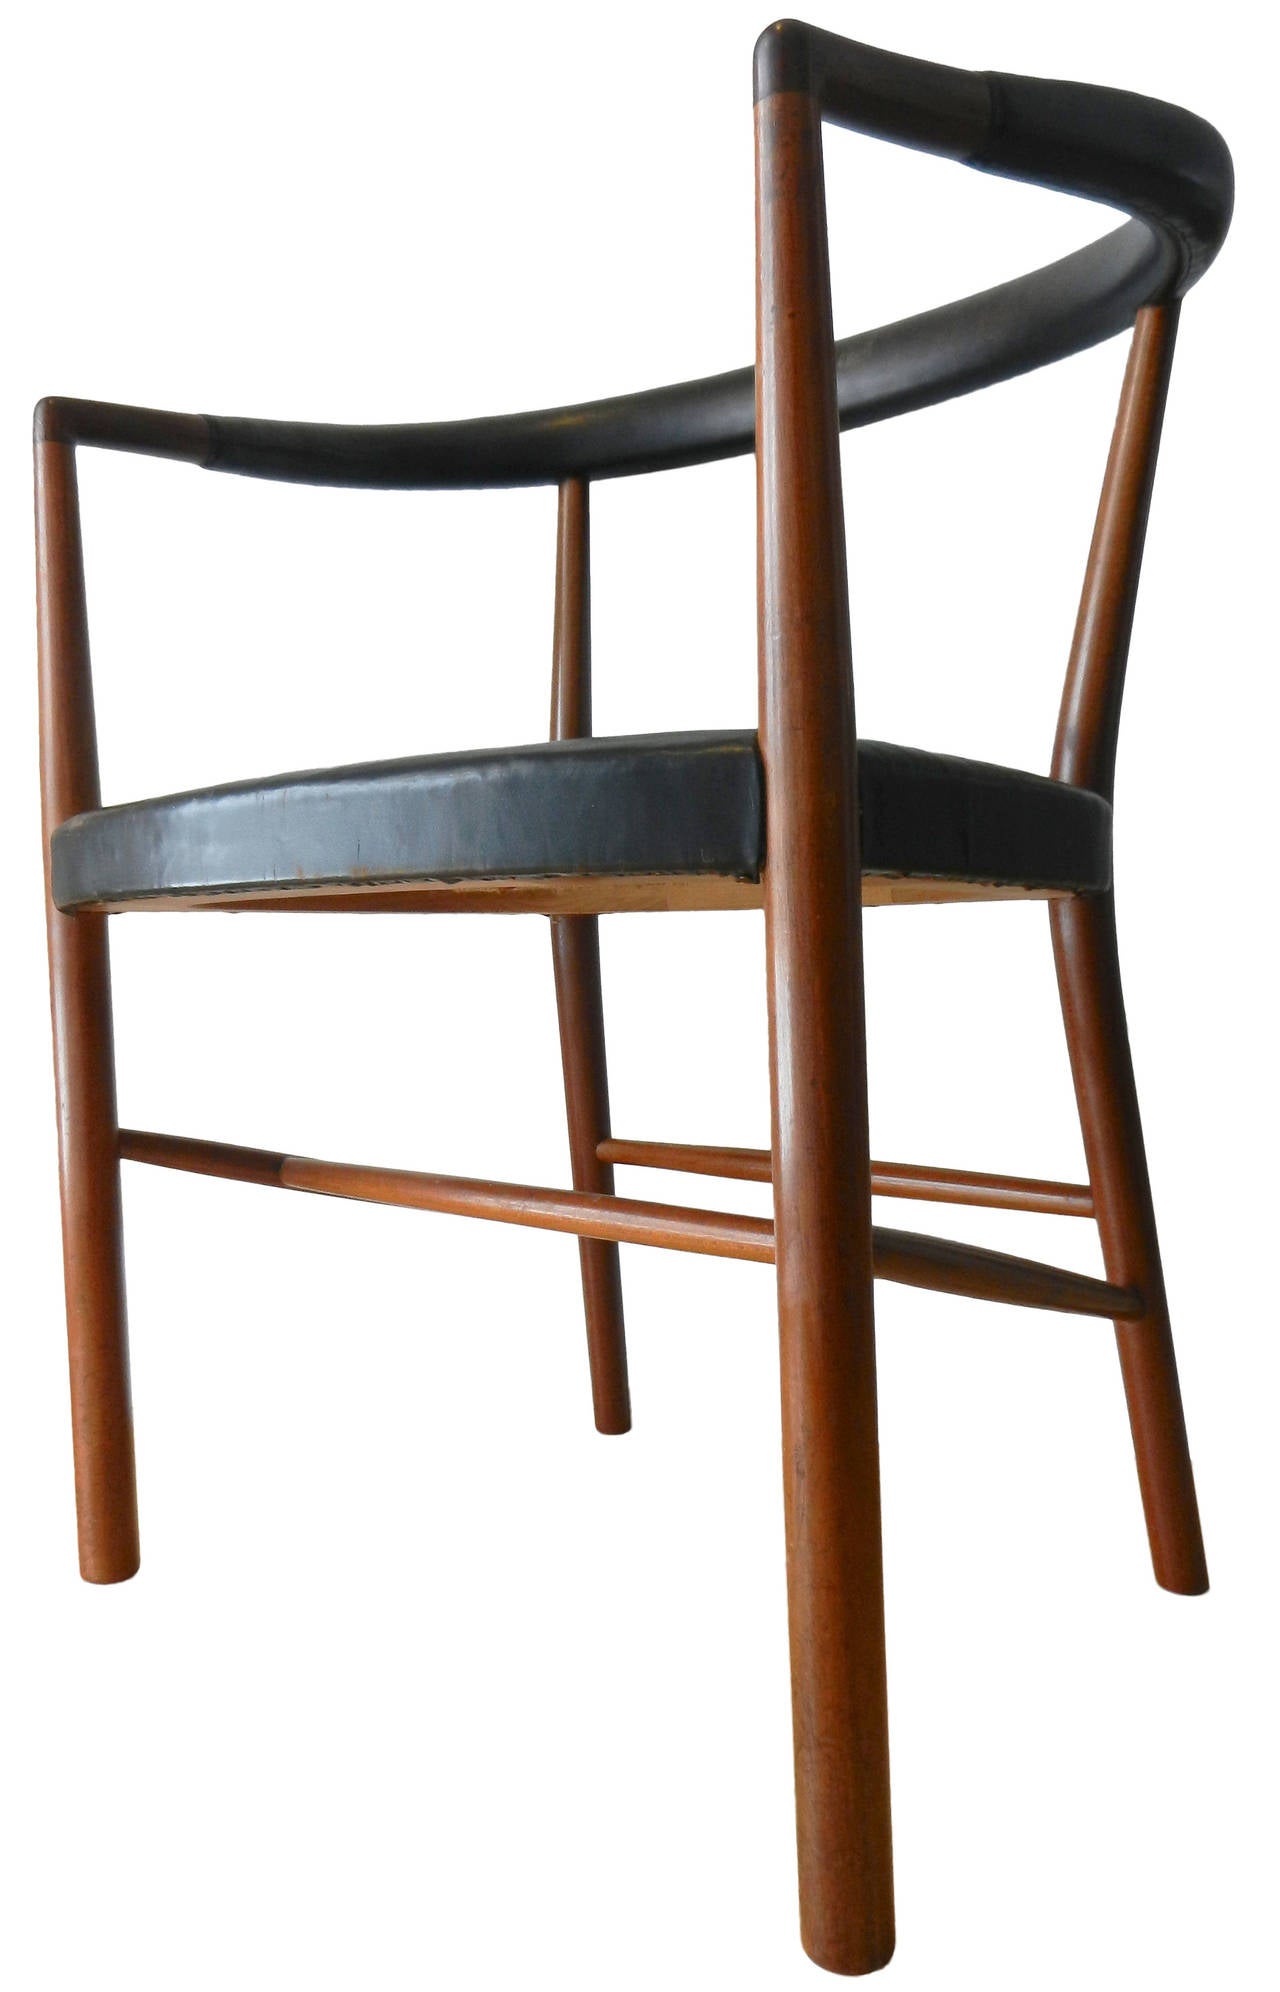 An exceptional example of the FN chair created by Jacob Kjaer in 1948.
Originally designed for use at the UN building in New York.